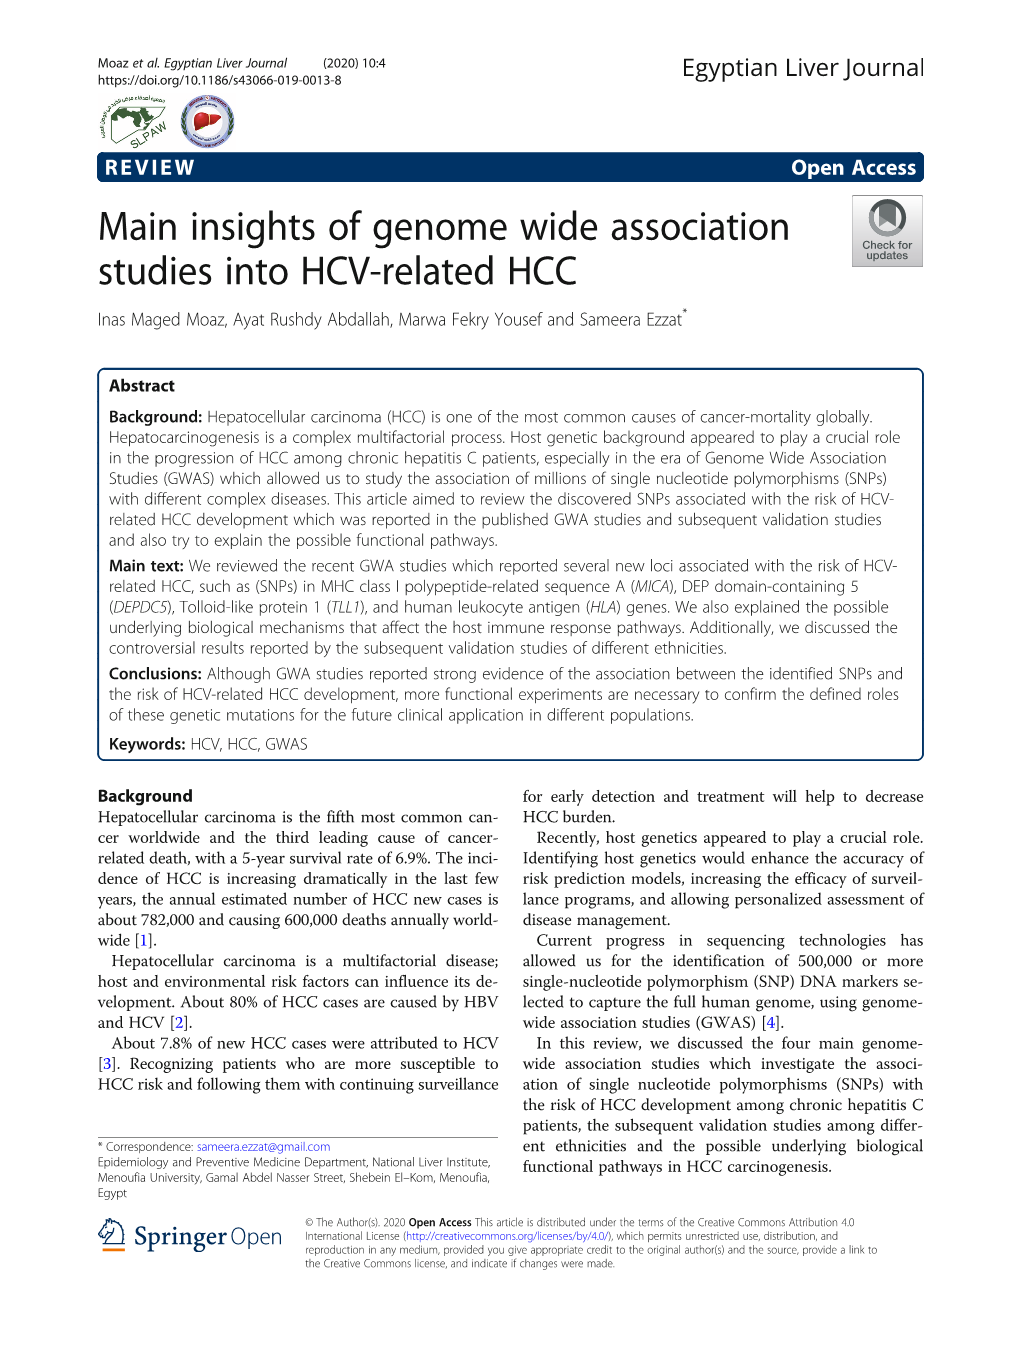 Insights of Genome Wide Association Studies Into HCV-Related HCC Inas Maged Moaz, Ayat Rushdy Abdallah, Marwa Fekry Yousef and Sameera Ezzat*